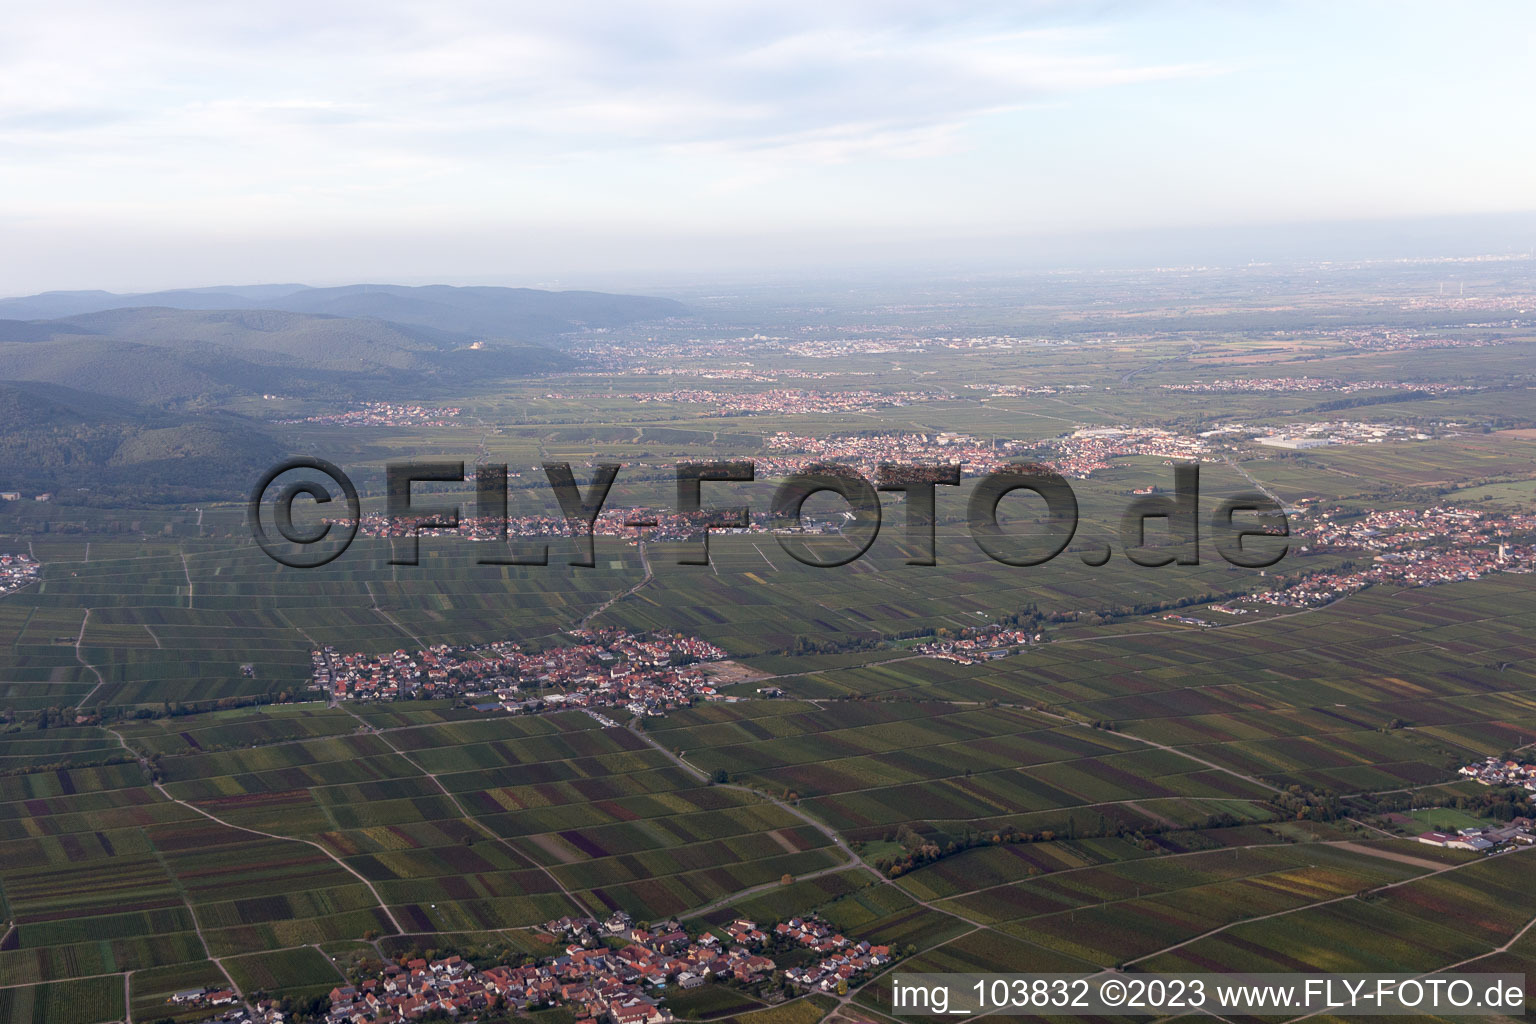 Aerial view of Flemlingen in the state Rhineland-Palatinate, Germany